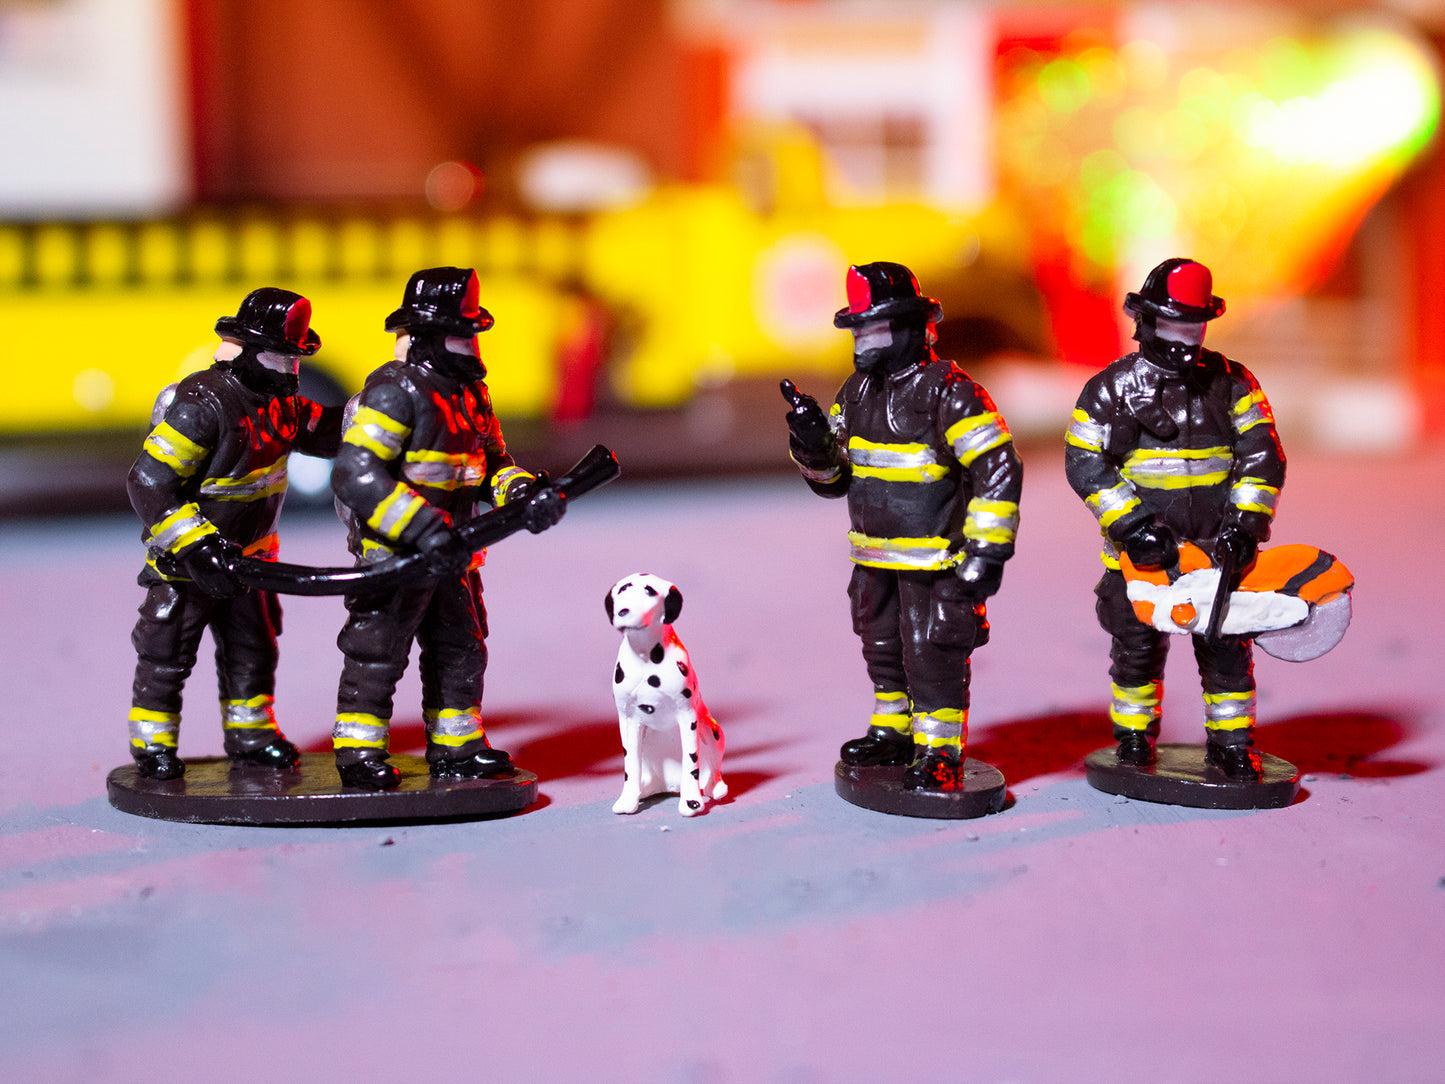 Firefighter figures and Dog